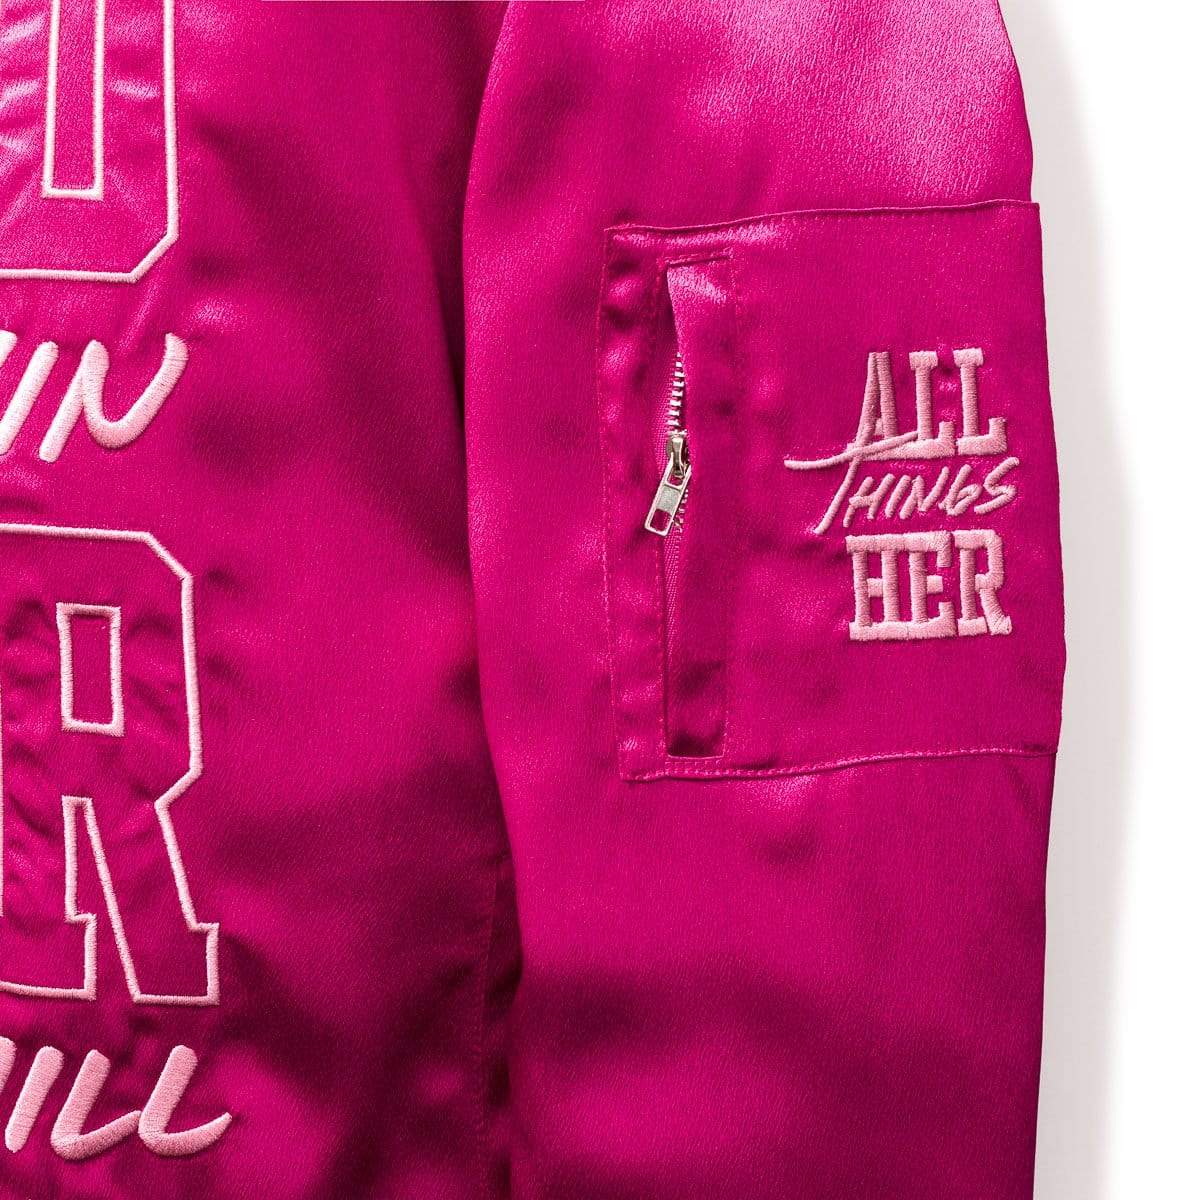 3:16 Collection Jacket WITHIN HER - WOMEN&#39;S BOMBER JACKET - FUCHSIA